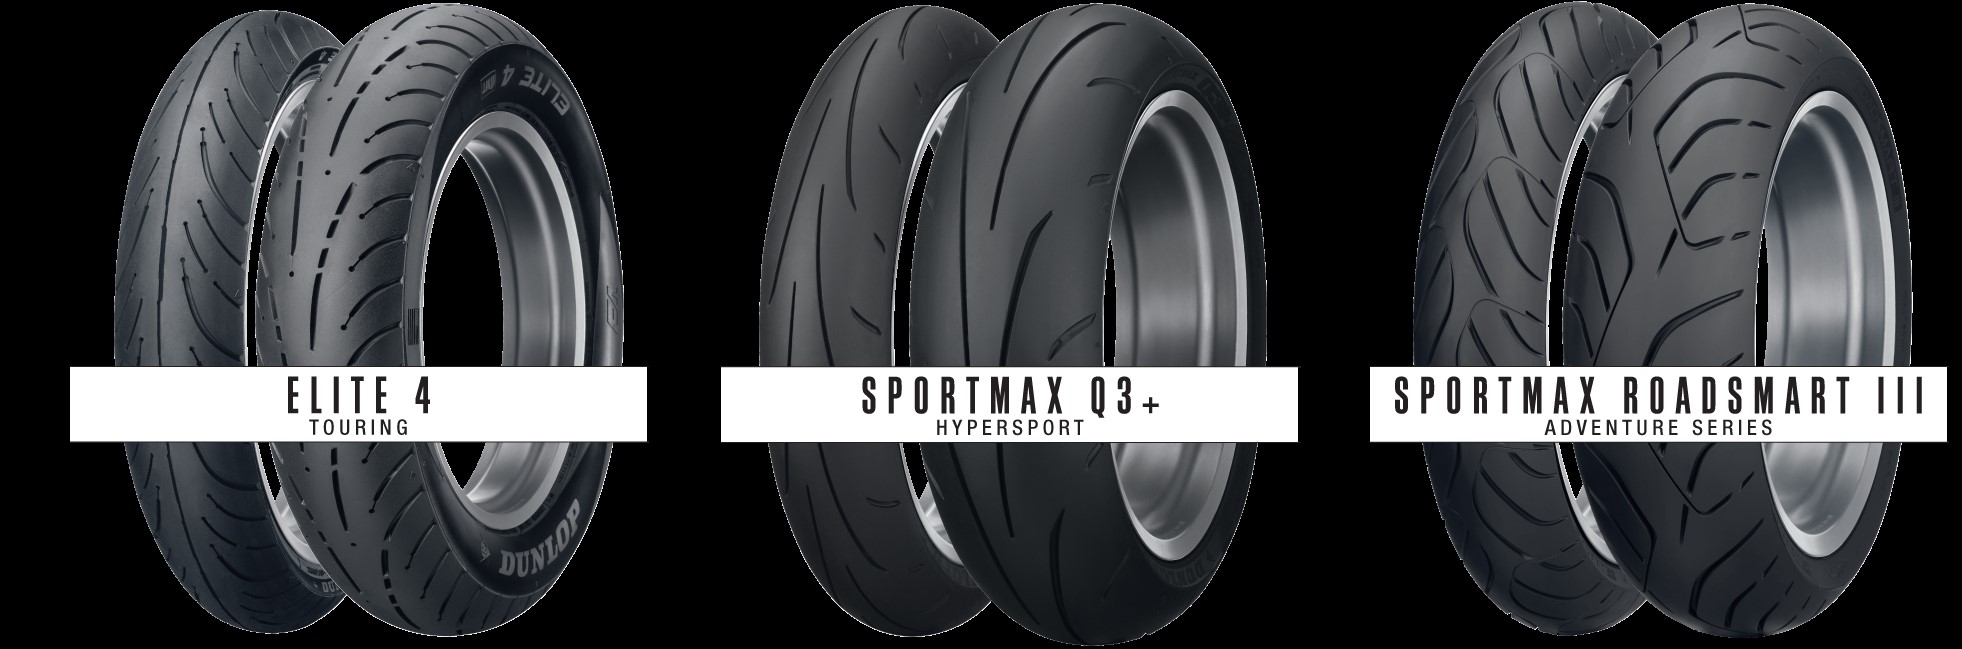 Dunlop Introduces New Sizes For Sportmax And Tires Roadracing World Magazine | Motorcycle Racing & Tech News